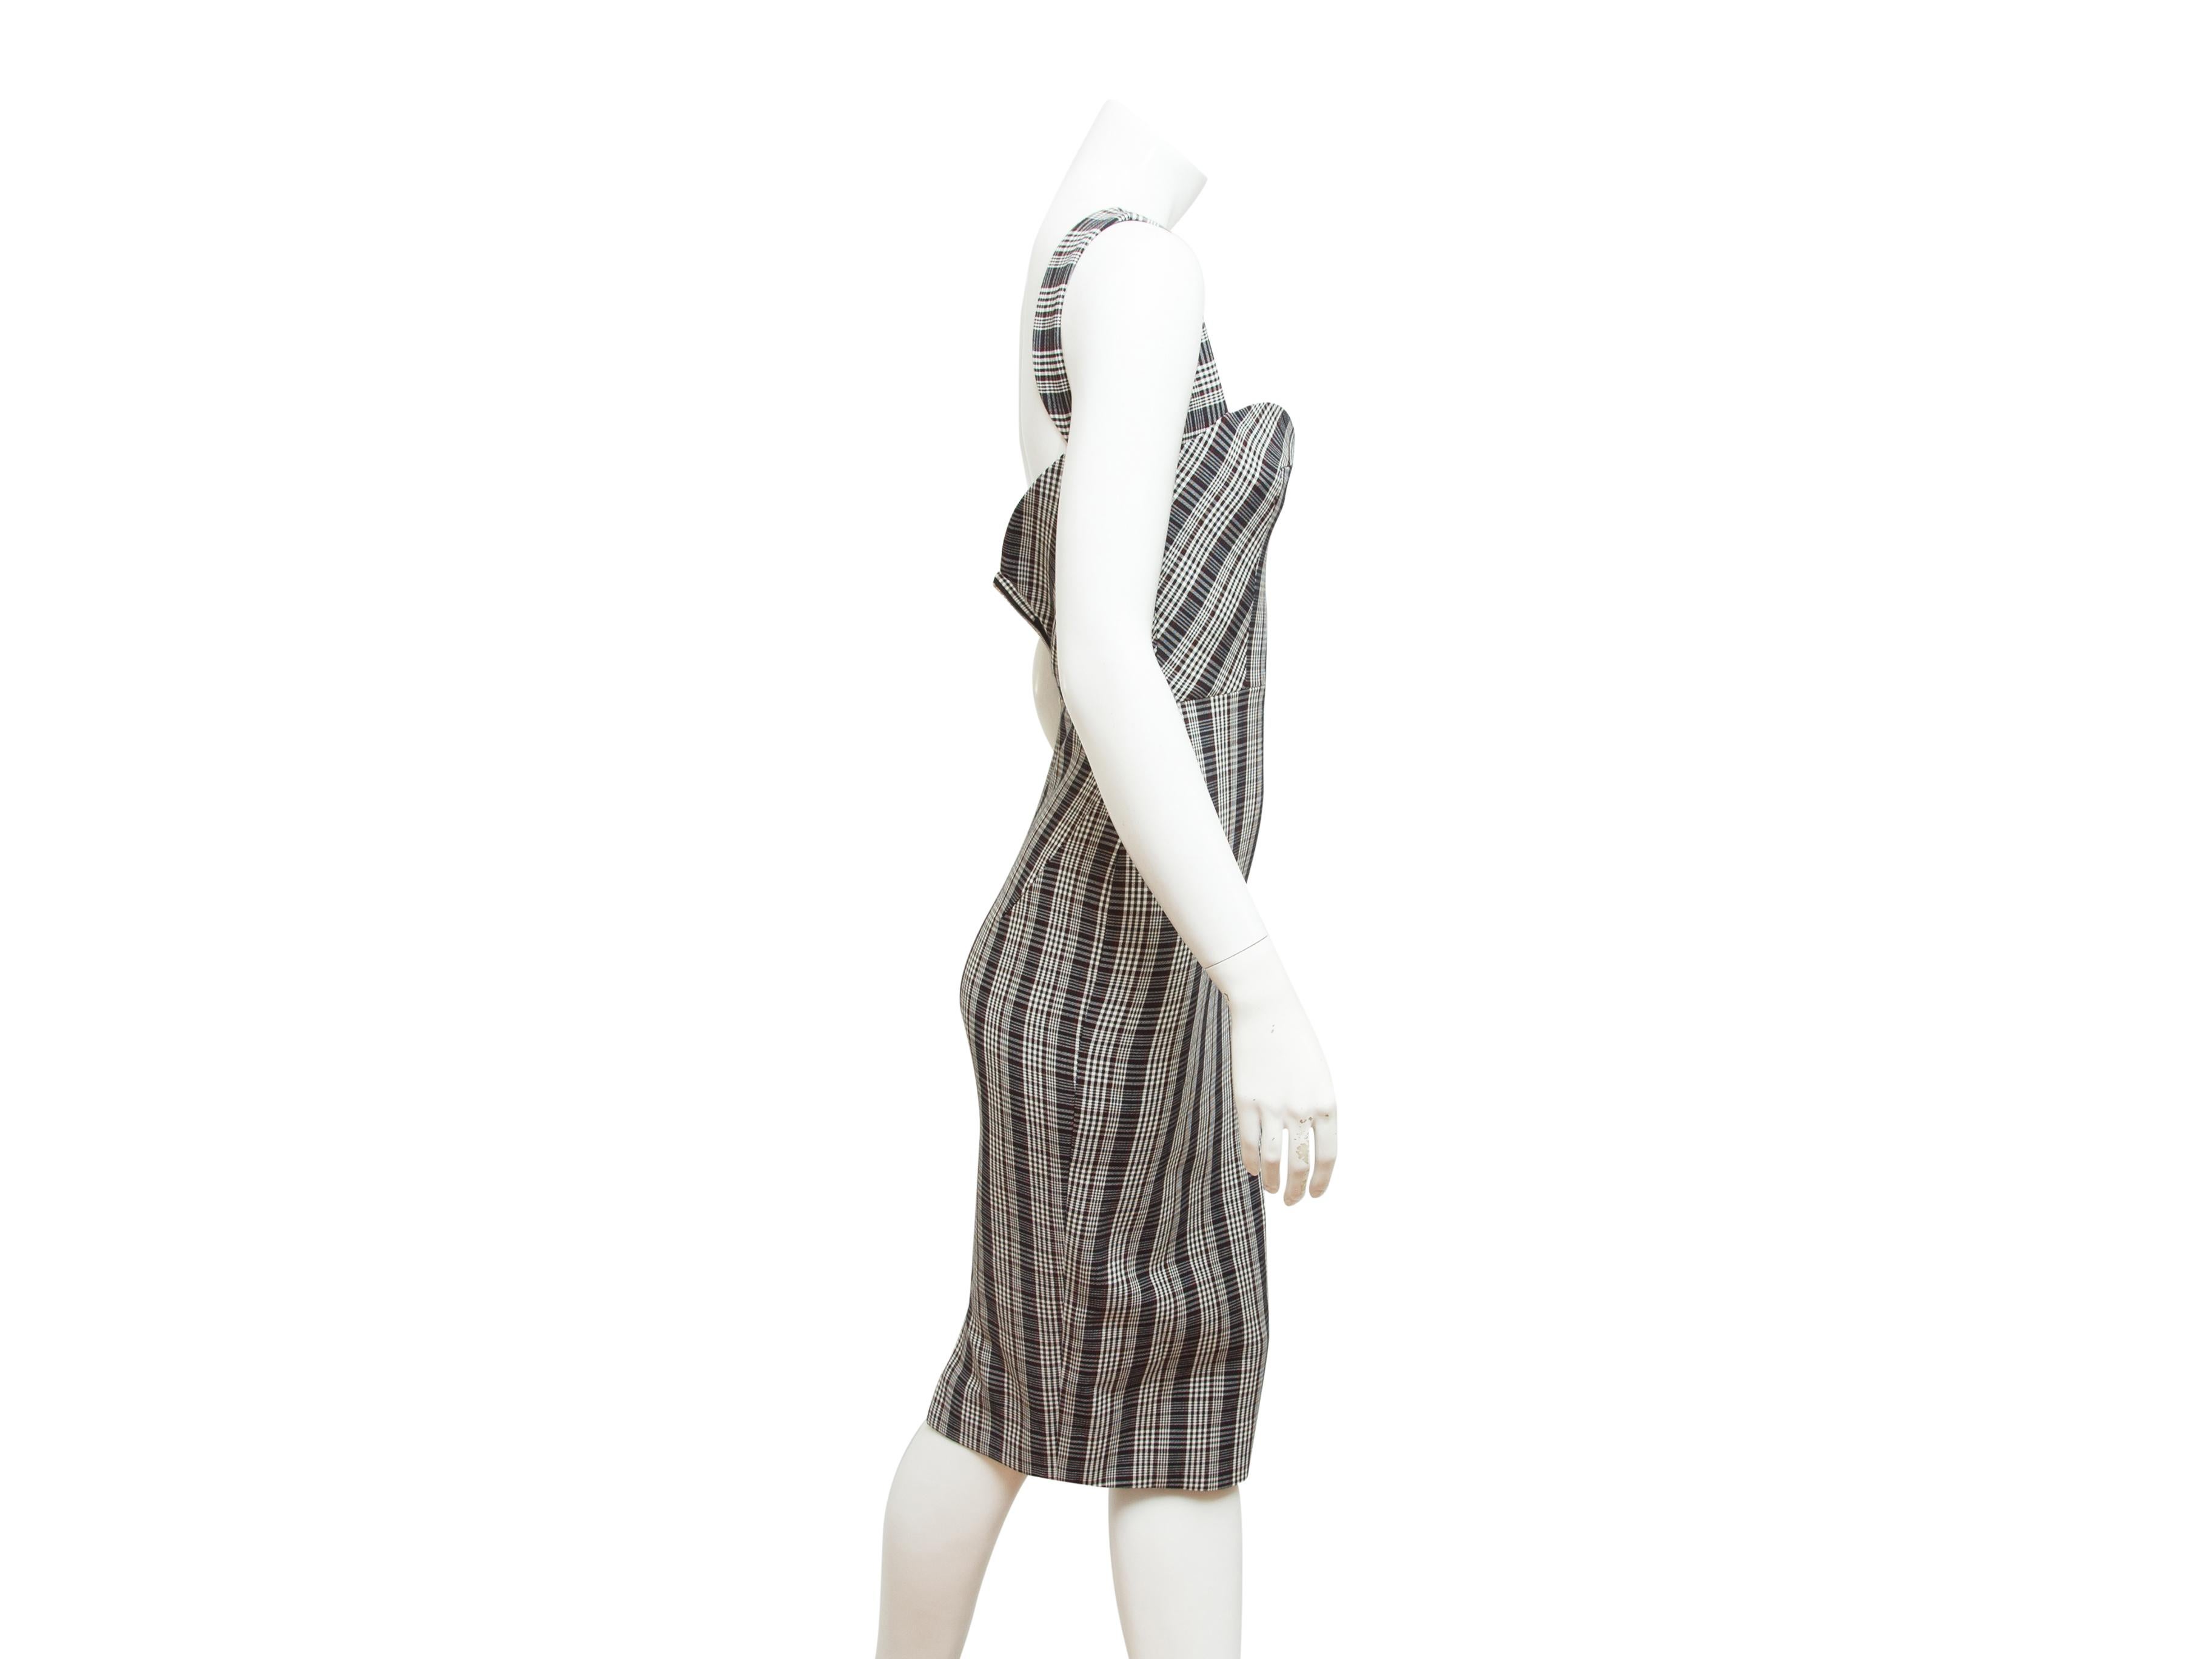 Product details:  Multicolor plaid sheath dress by Victoria Beckham.  Sweetheart neck.  Sleeveless.  Exposed back zip closure.  Silvertone hardware.  30